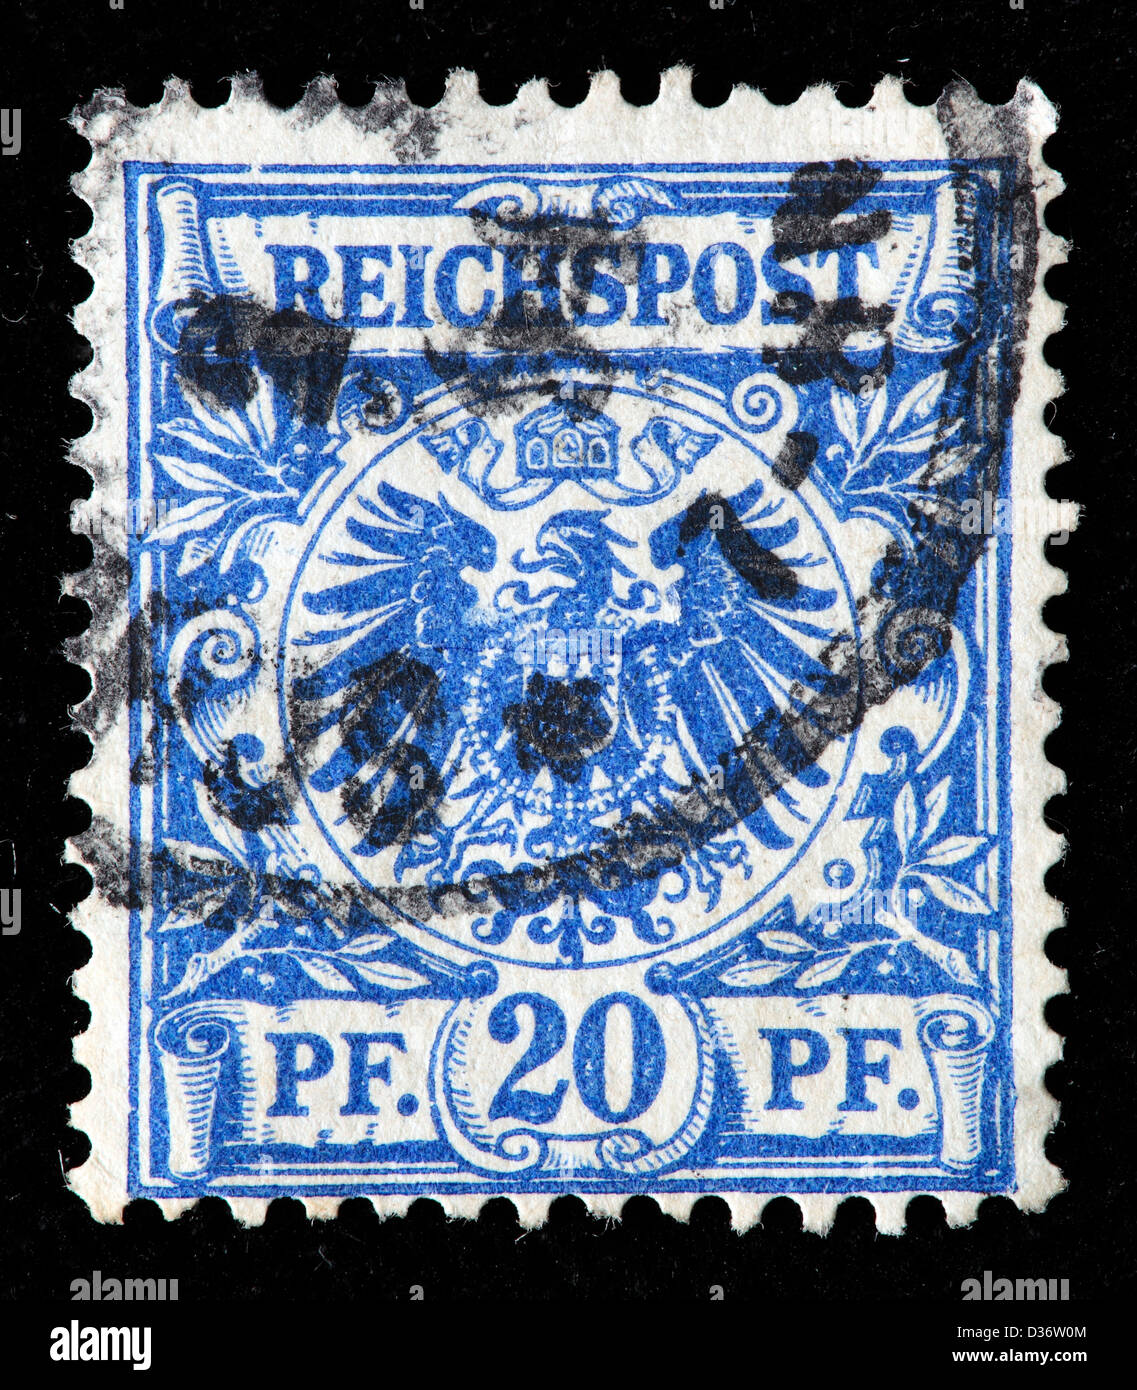 Reichspost postage stamp, Germany, 1889 Stock Photo